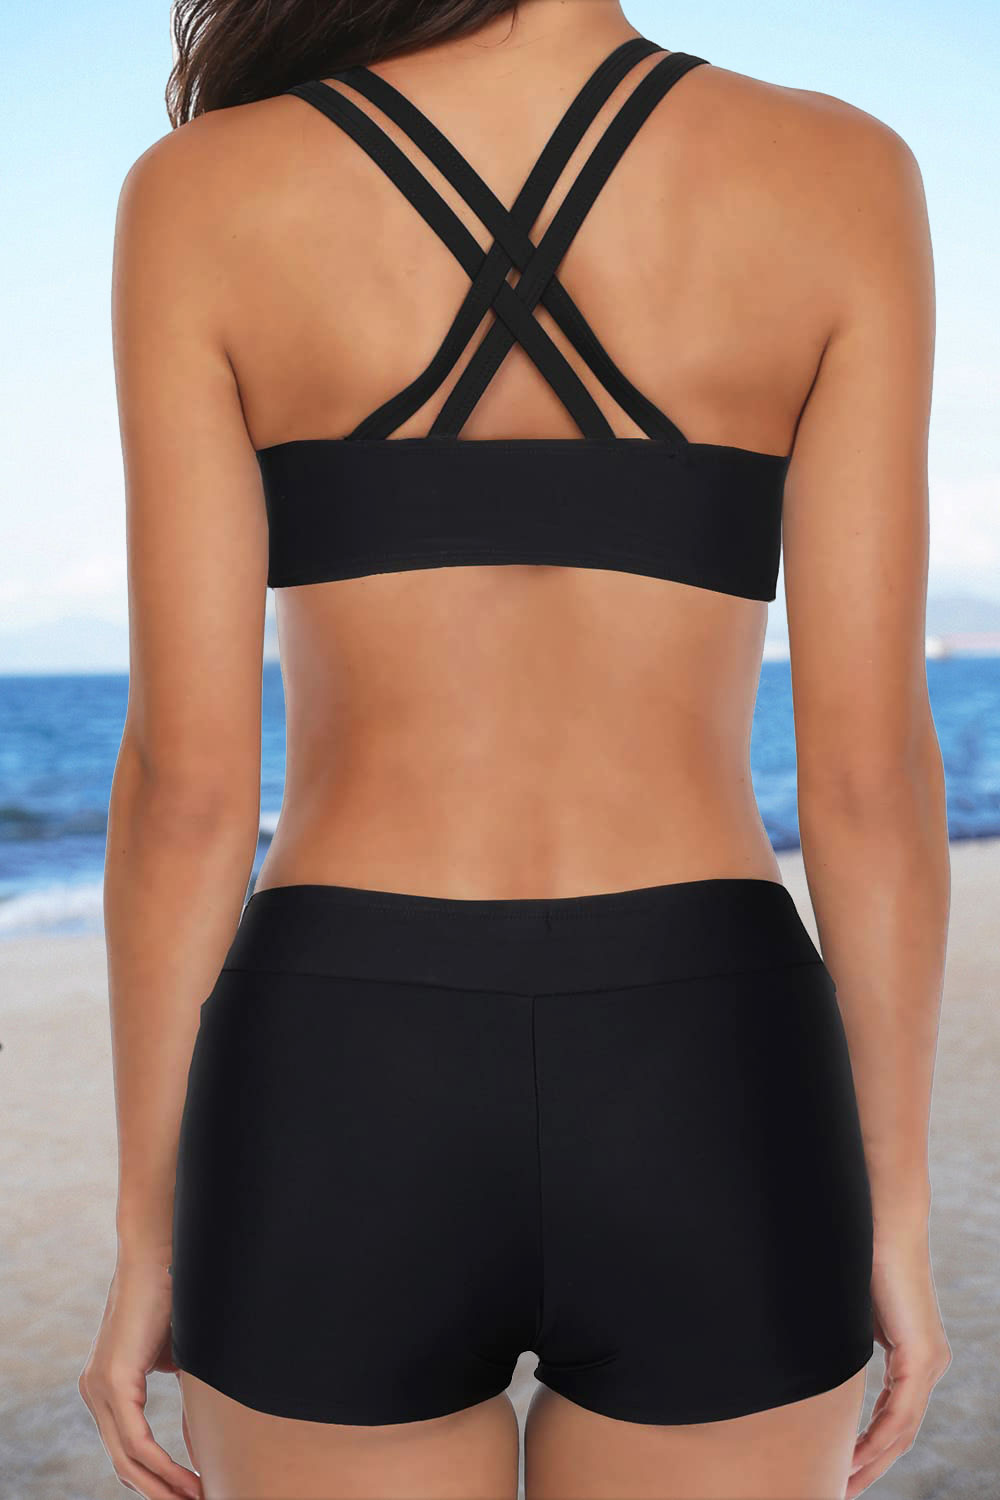 Solid Black 3 Piece Swim Tank Top with Shorts and Bra Modest